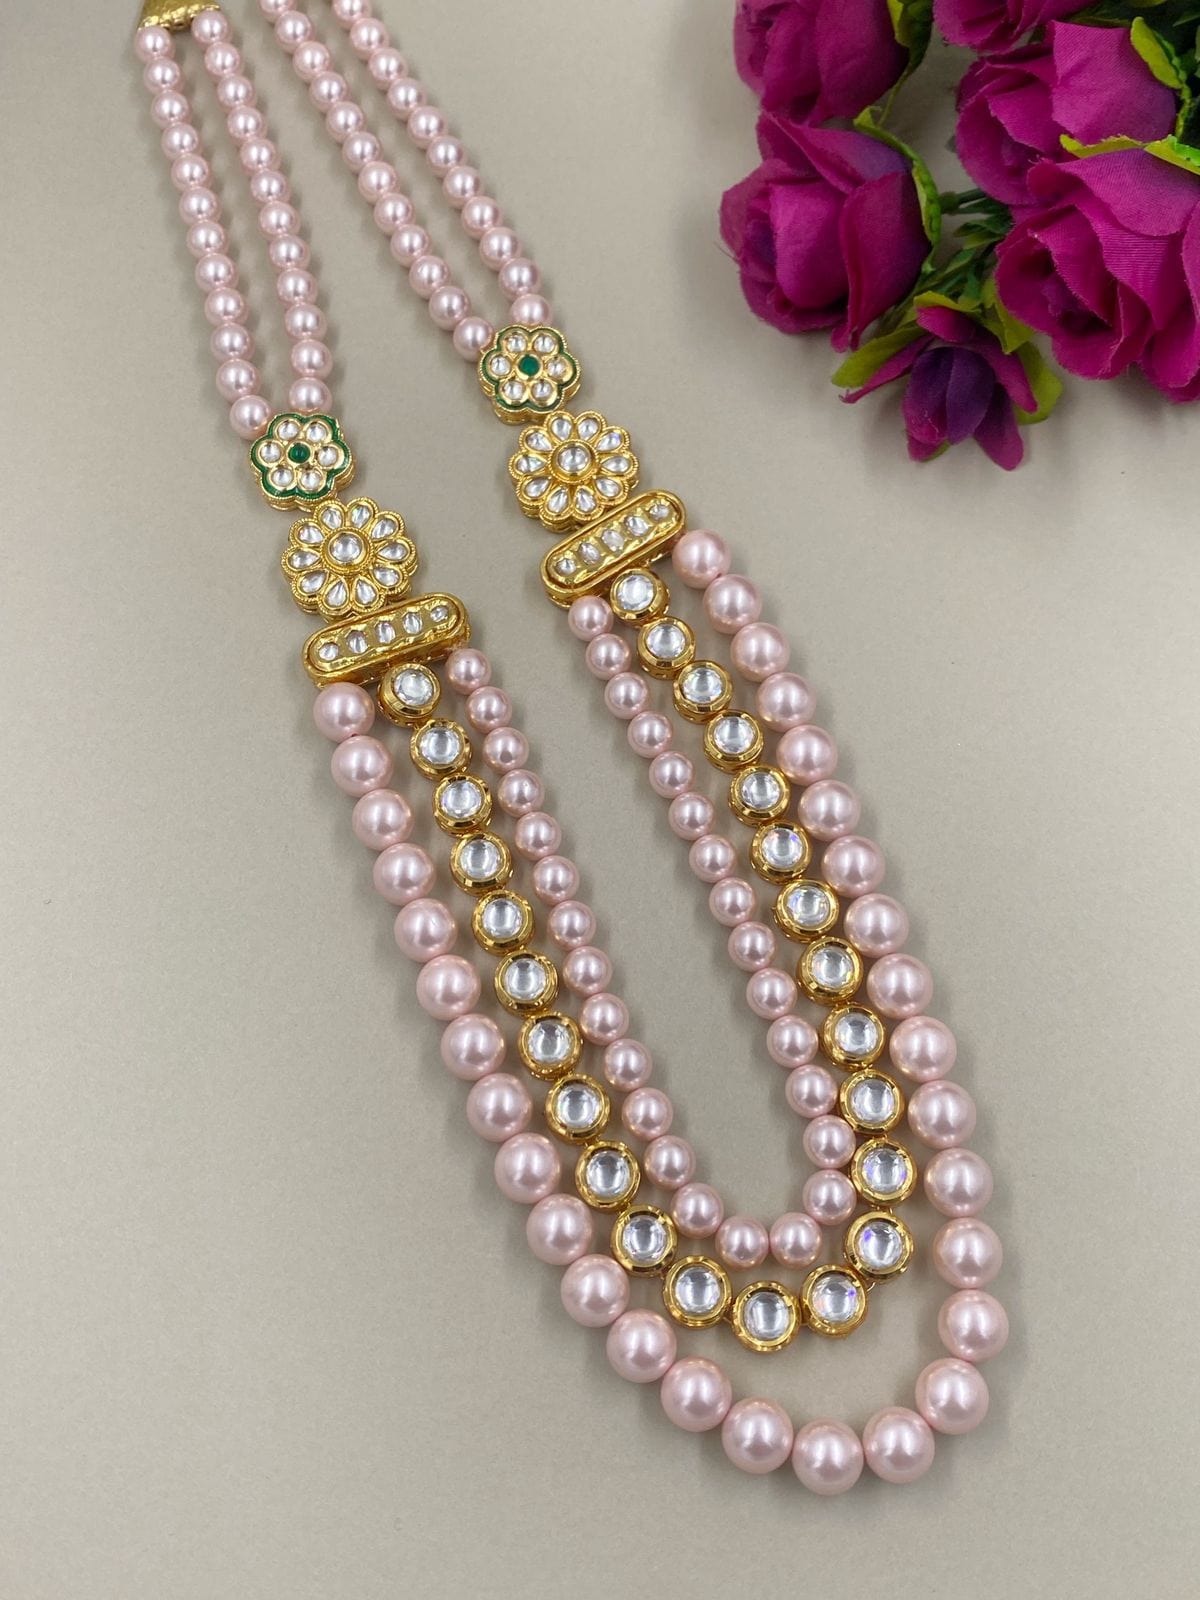 Real Rose Pink Shell Pearls And Kundan Beads Mala Necklace For Men And Women Beads Jewellery